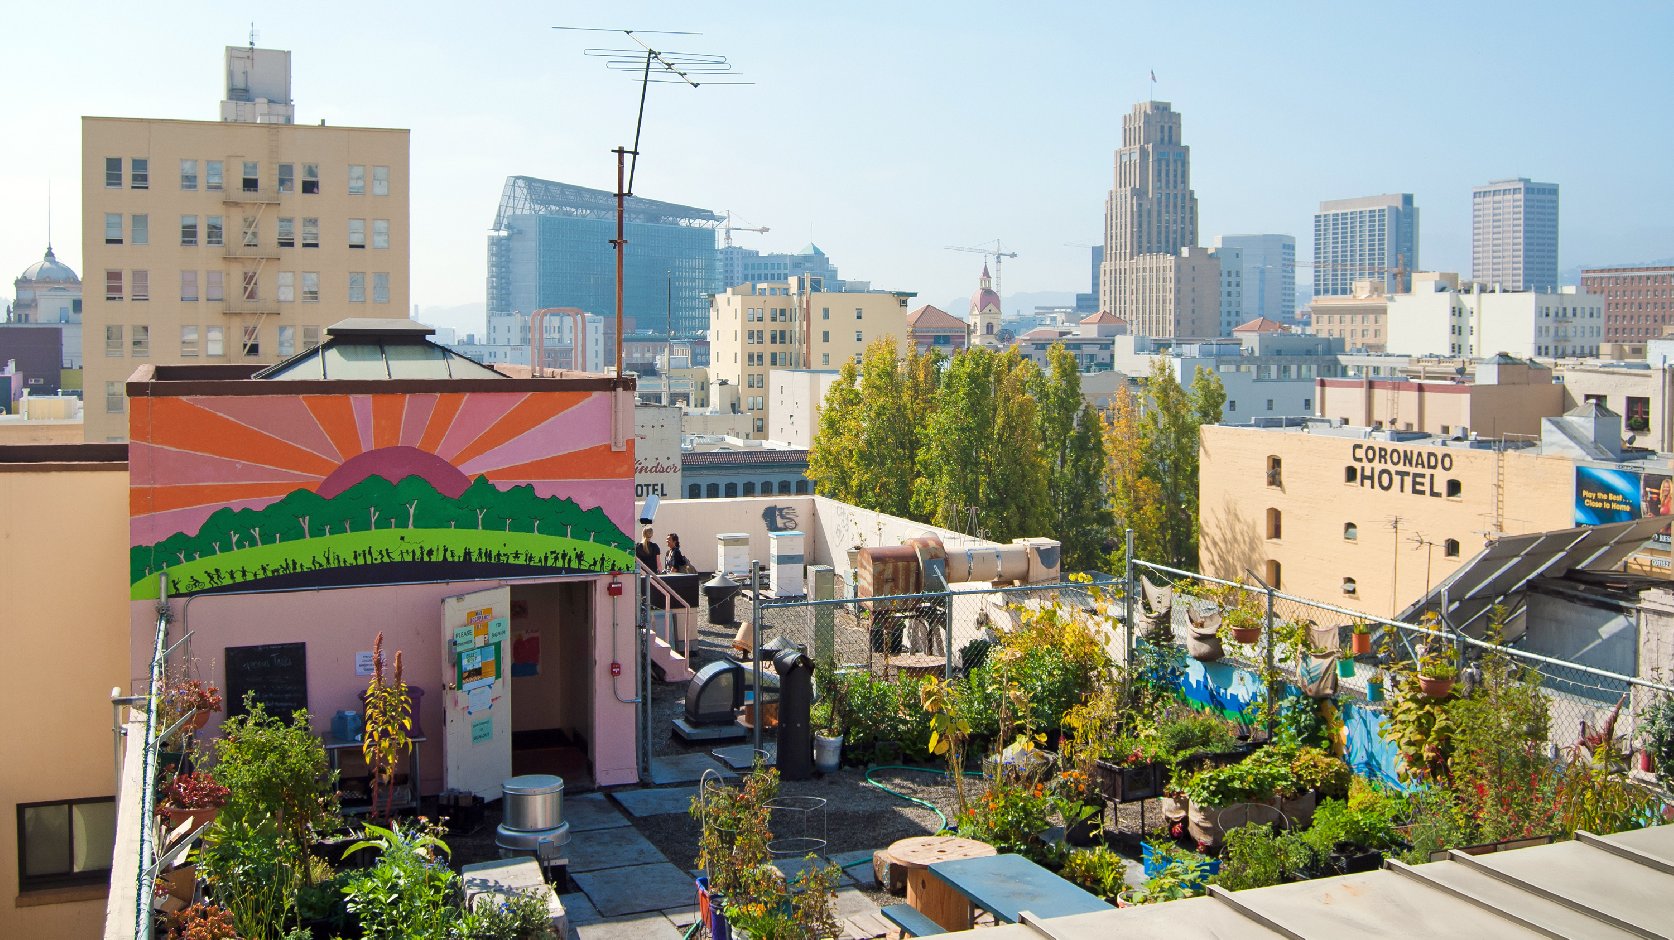 Graze the Roof is a community-produced garden that grows vegetables on the rooftop of a church in San Francisco. Photo: Sergio Ruiz. Flickr